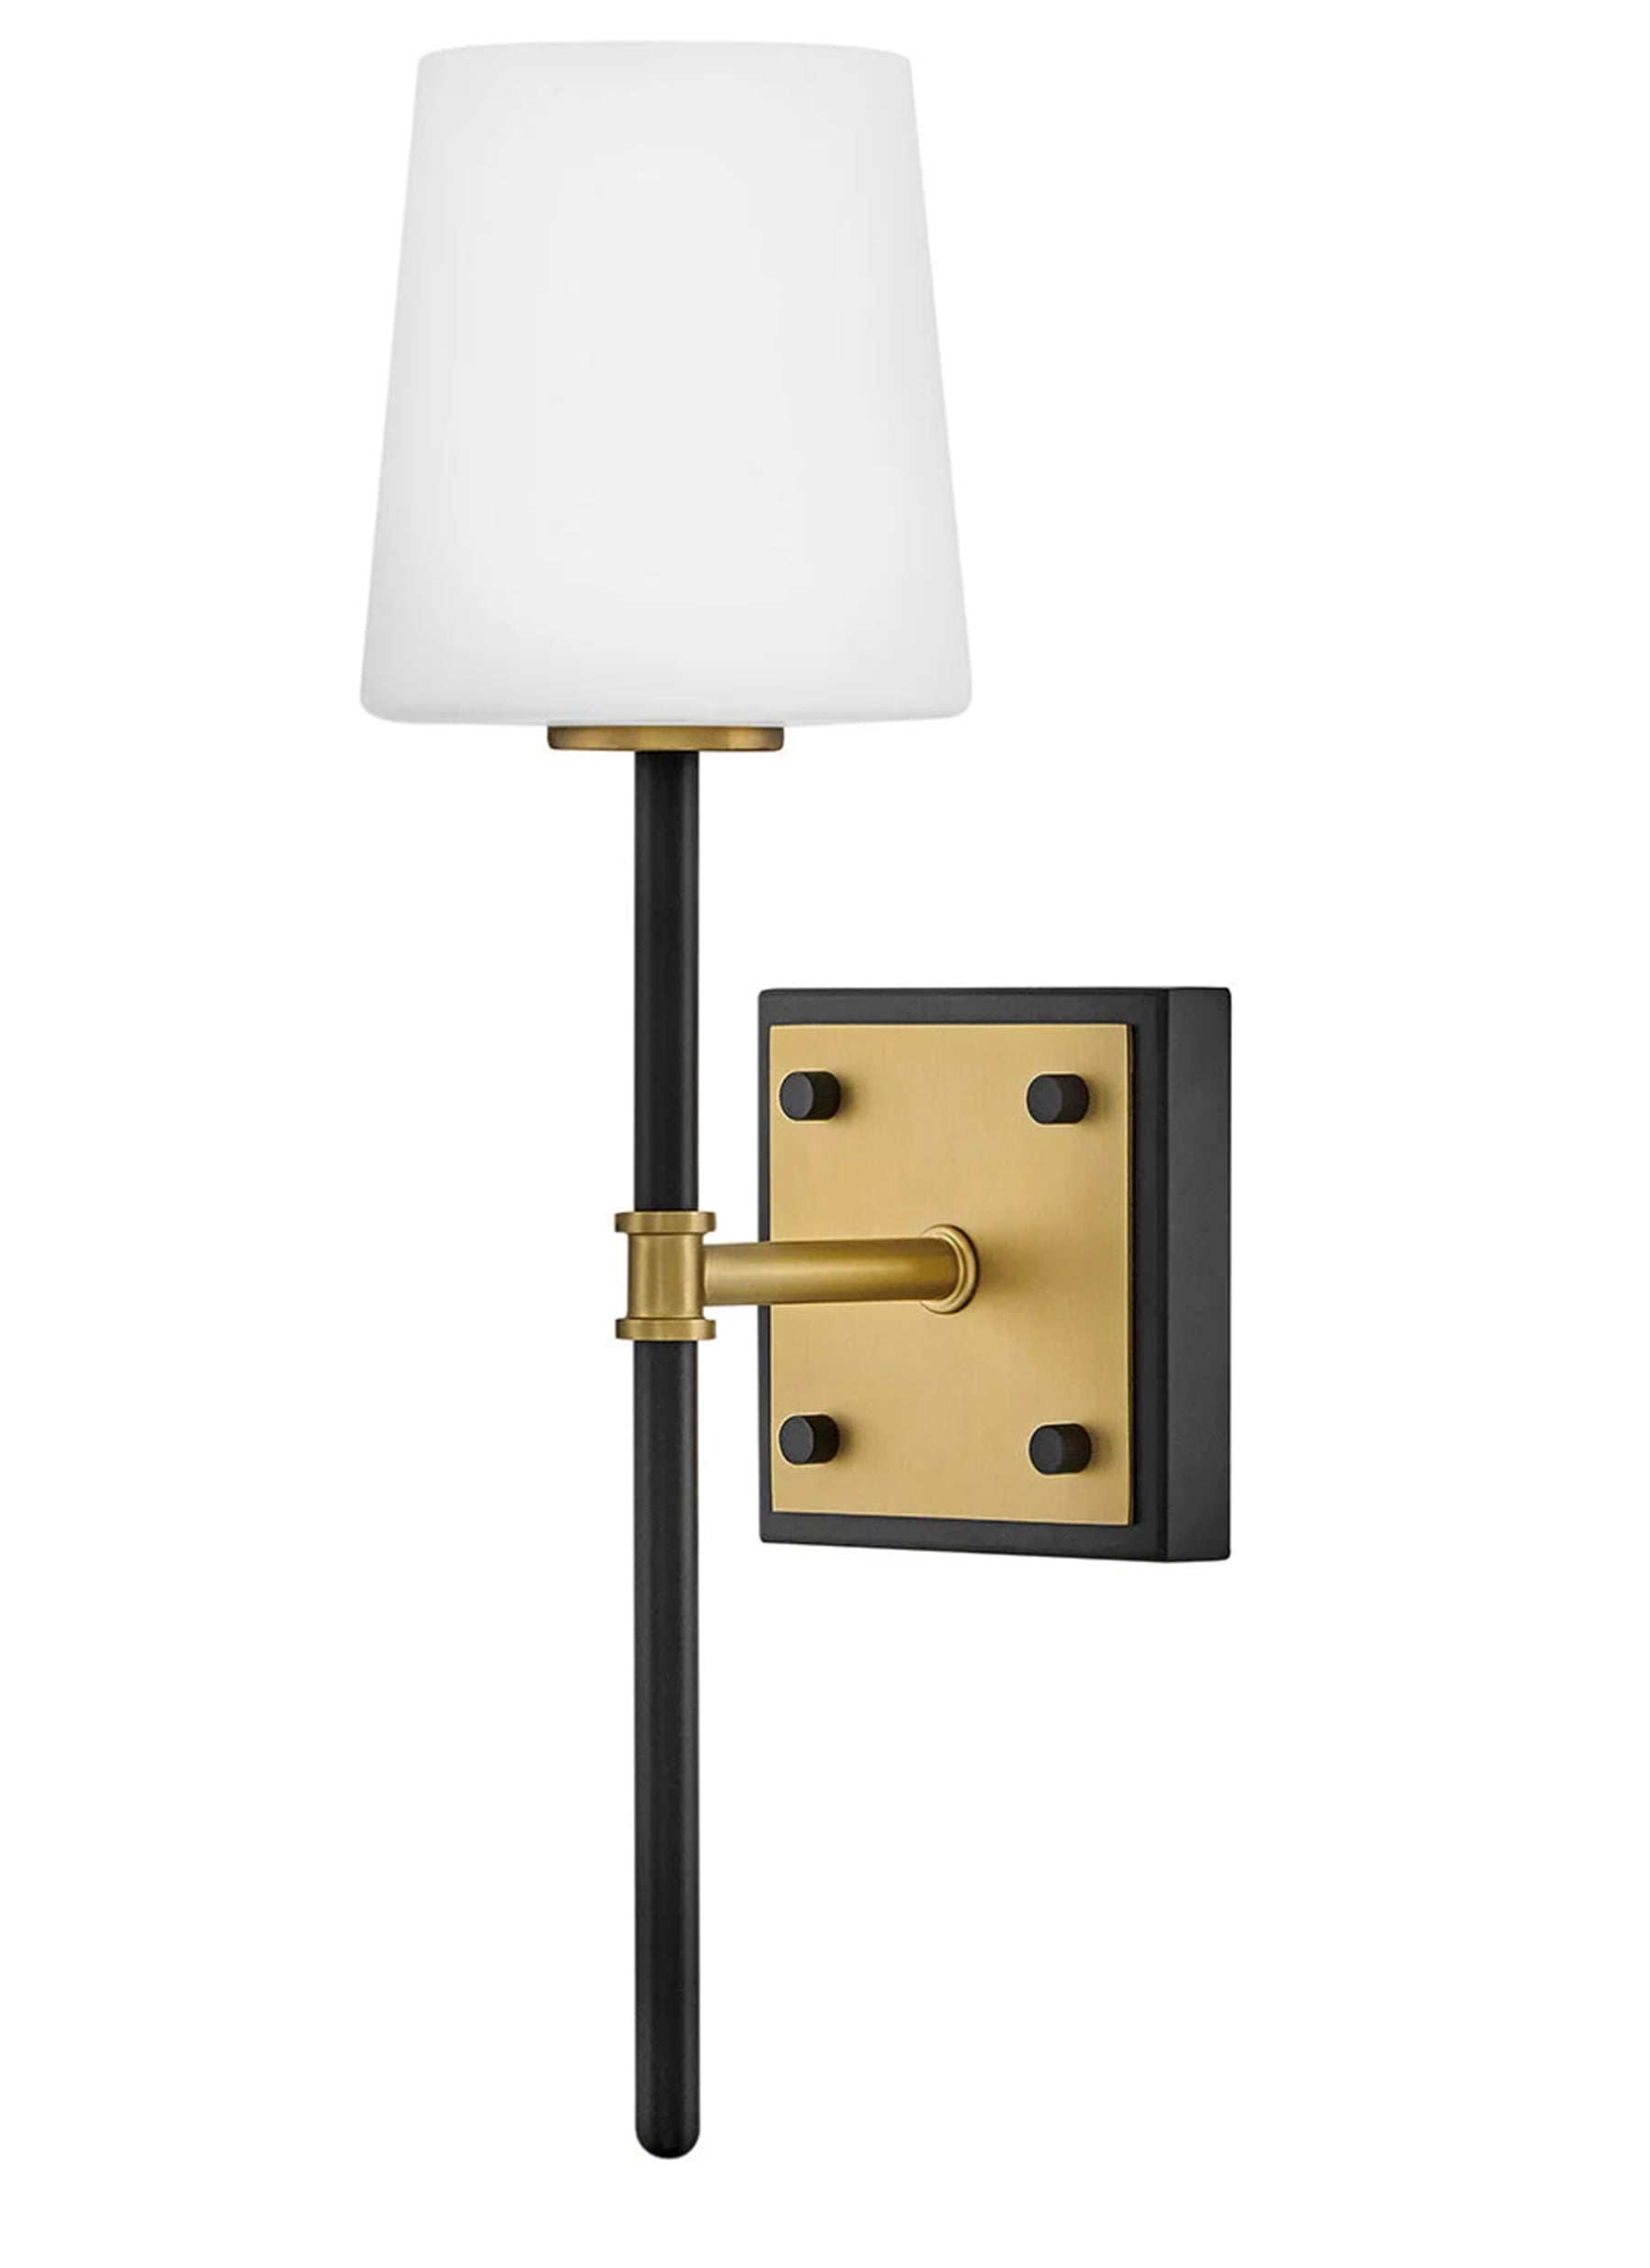 Saunders 1L wall sconce - 46950BK-LCB